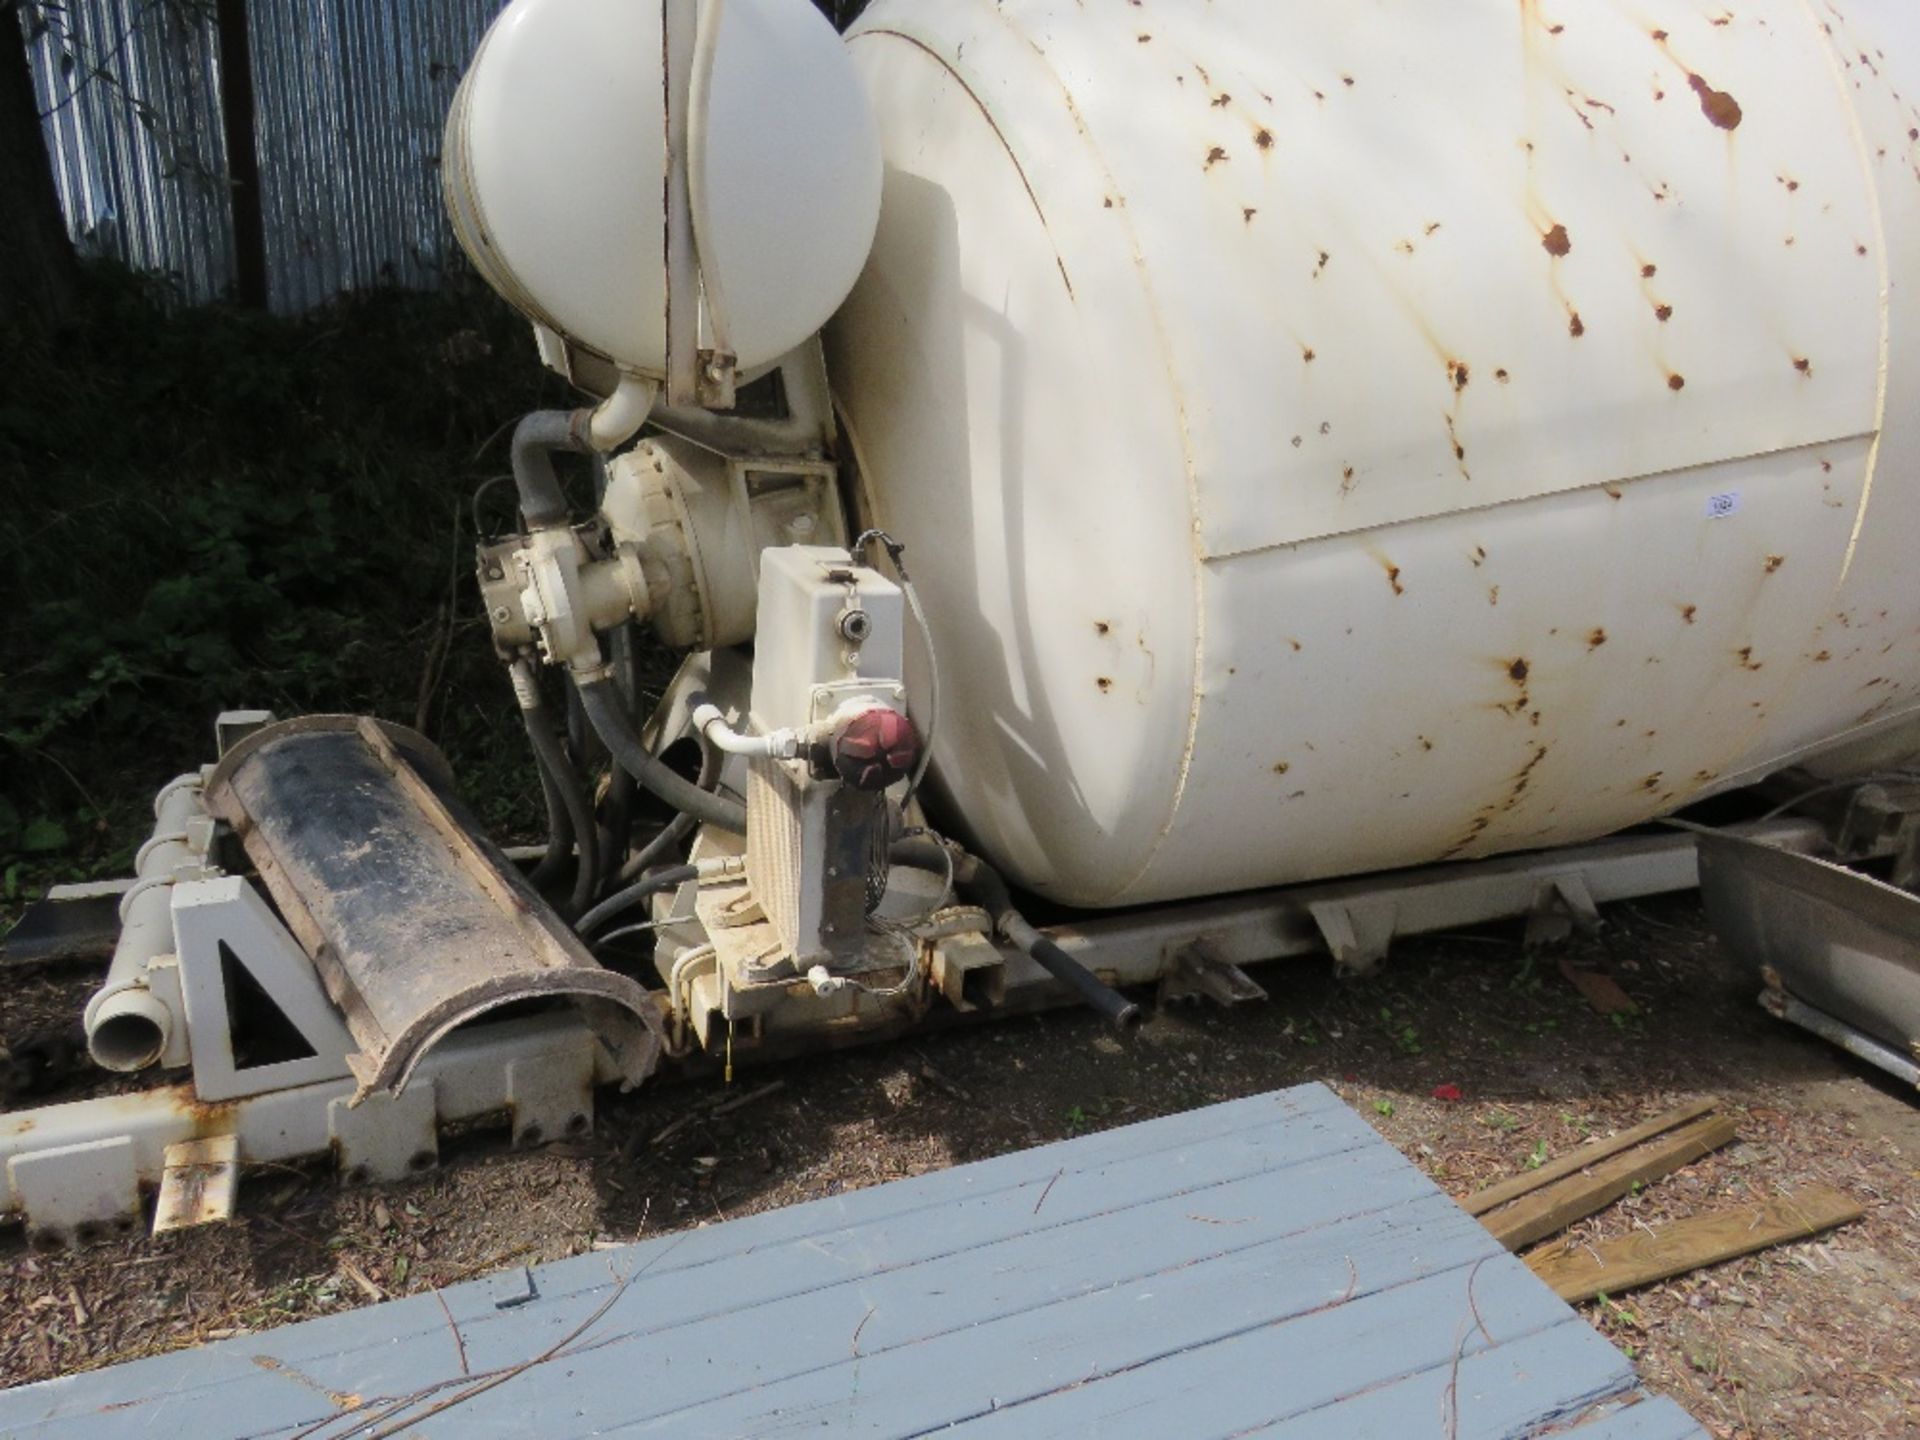 LORRY CEMENT MIXER DRUM RECENTLY REMOVED FROM 8 WHEEL DAF LORRY, COMPLETE WITH PTO PUMP. - Image 2 of 7